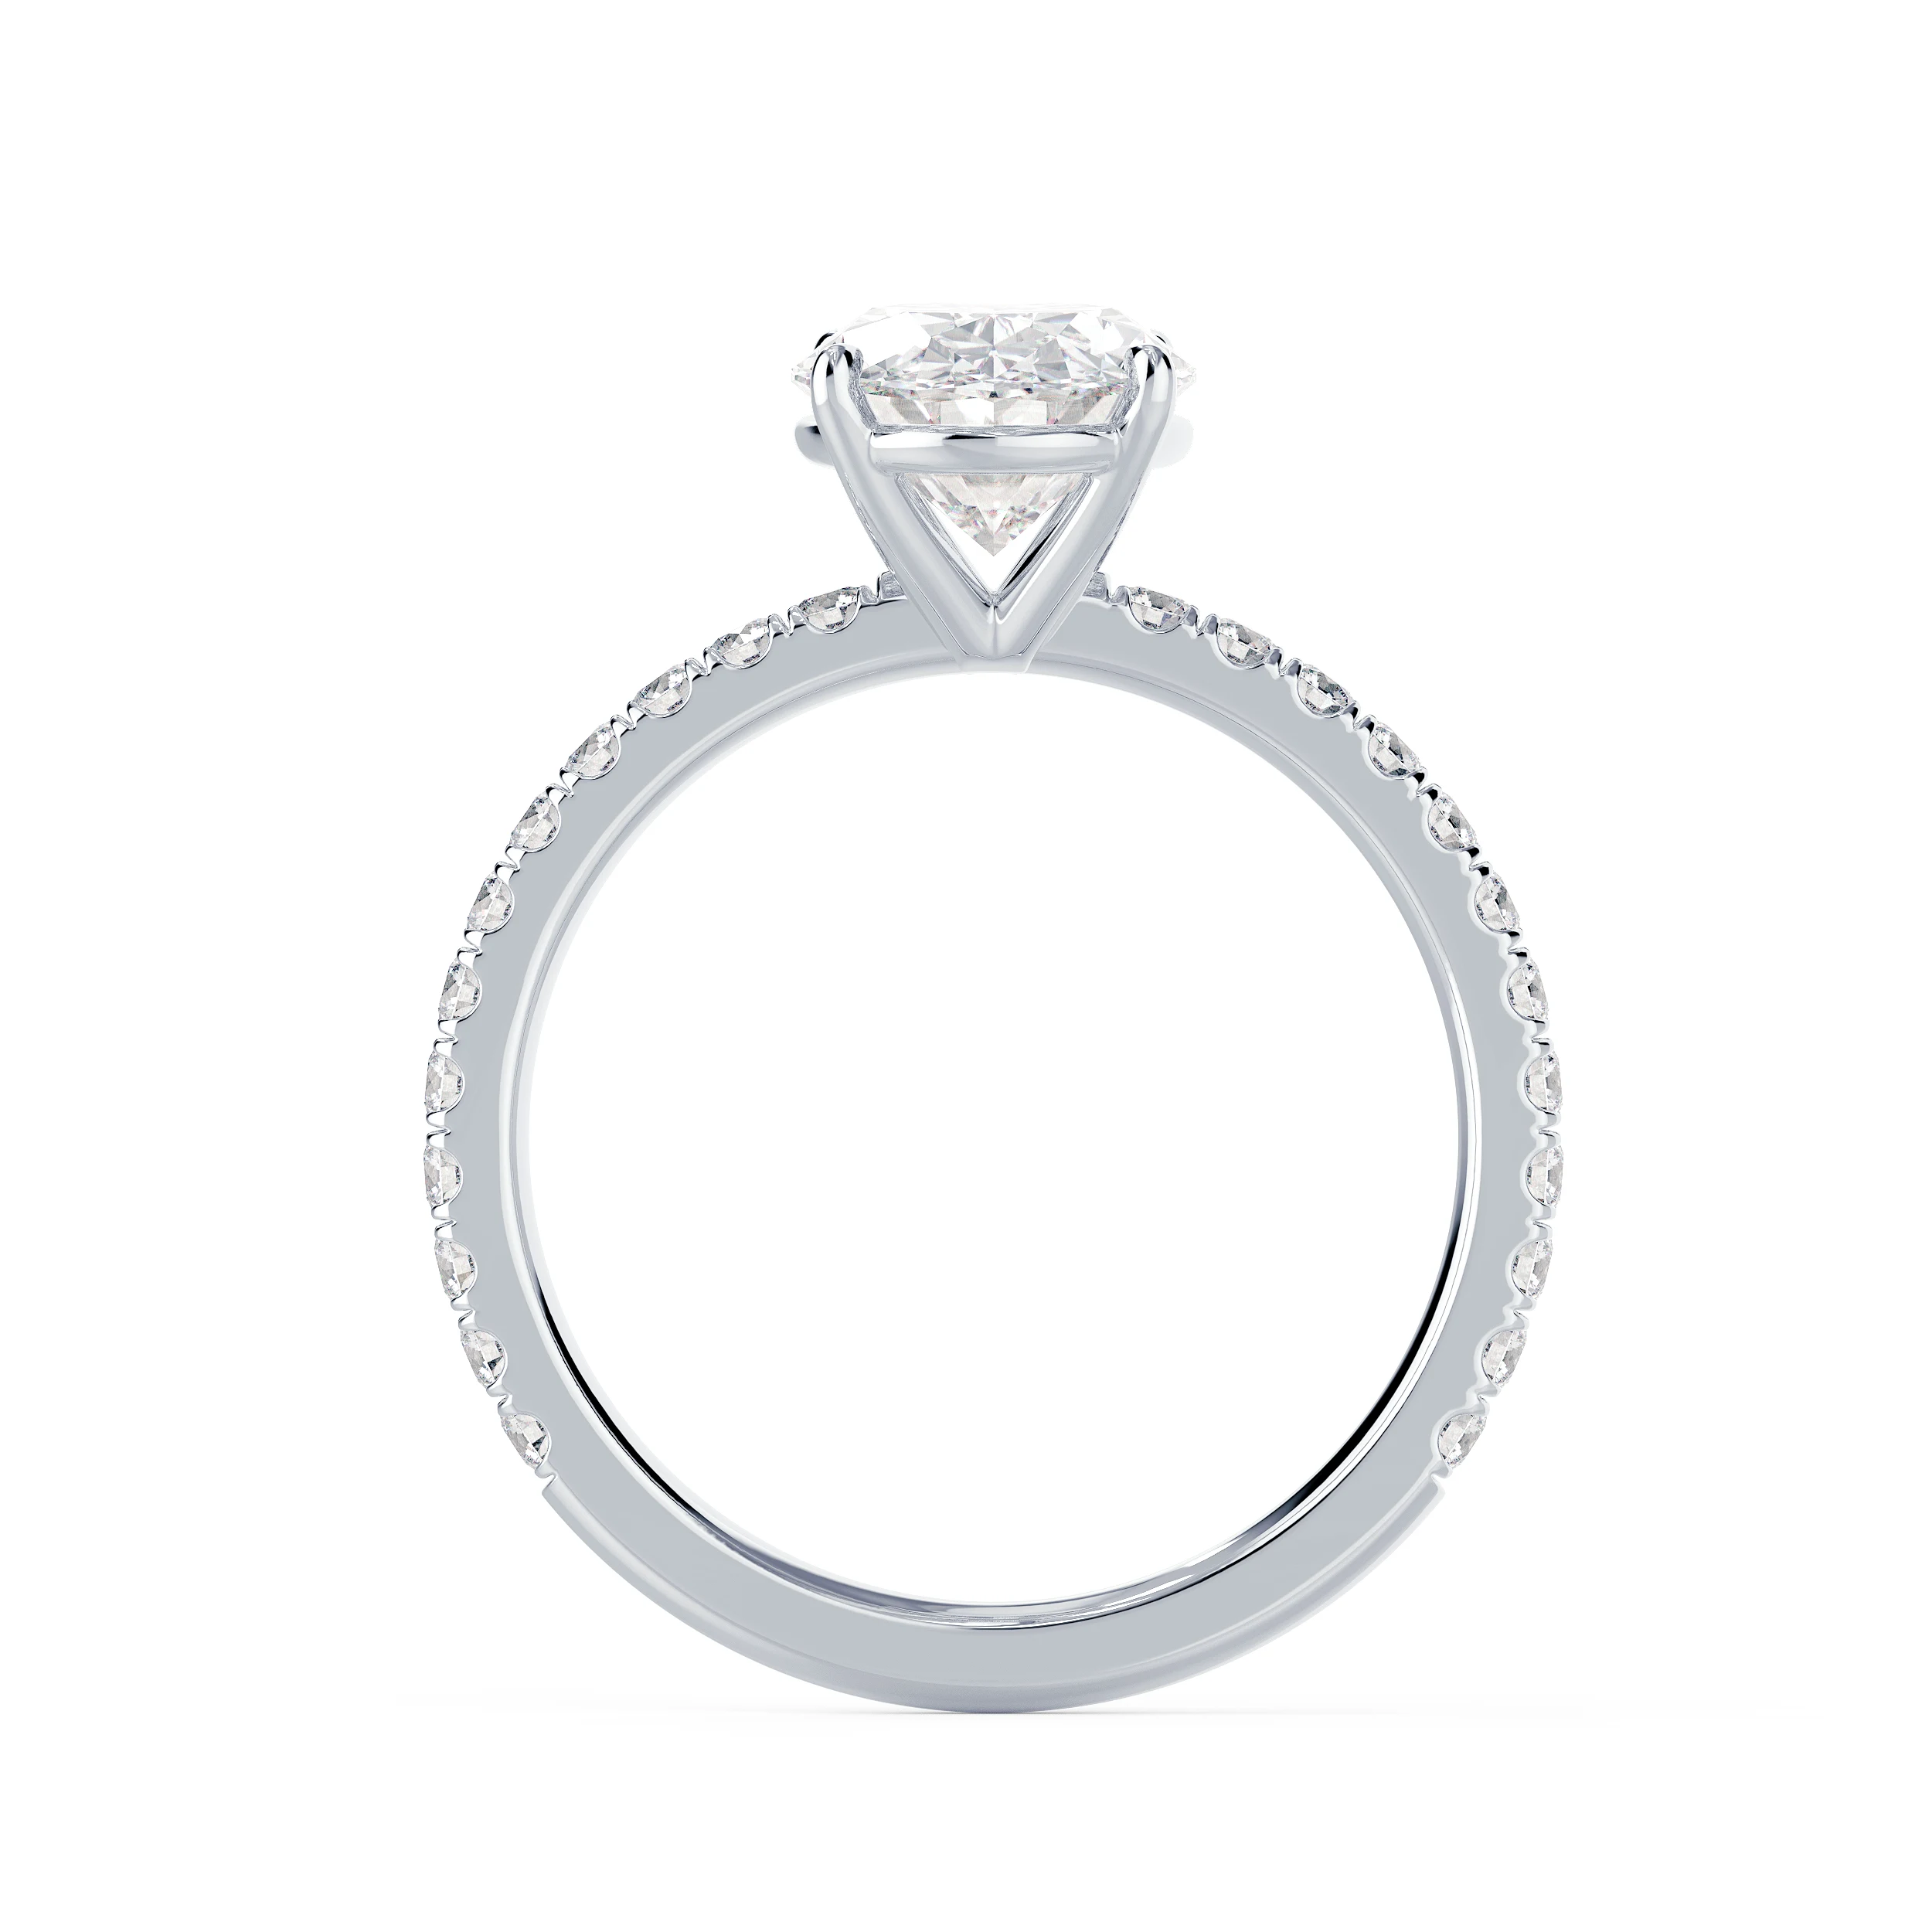 Man Made Diamonds Oval Petite Four Prong Pavé Diamond Engagement Ring in White Gold (Profile View)